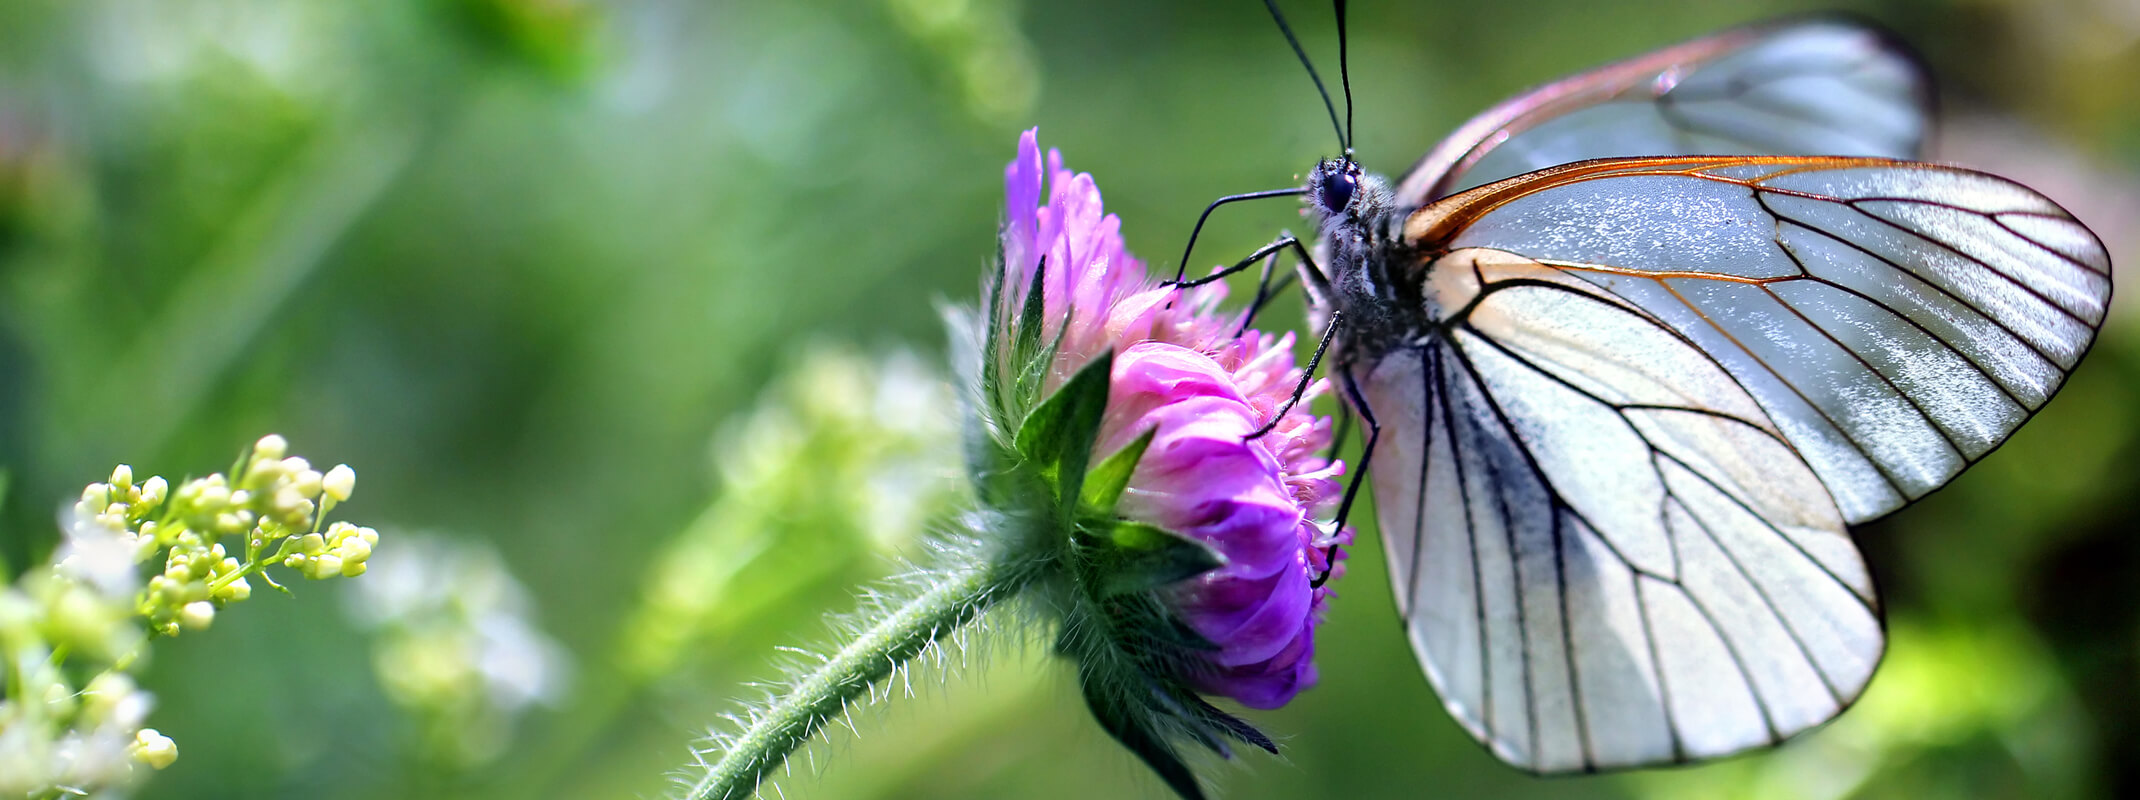 Butterfly with luminous white wings hanging on to a purple flower